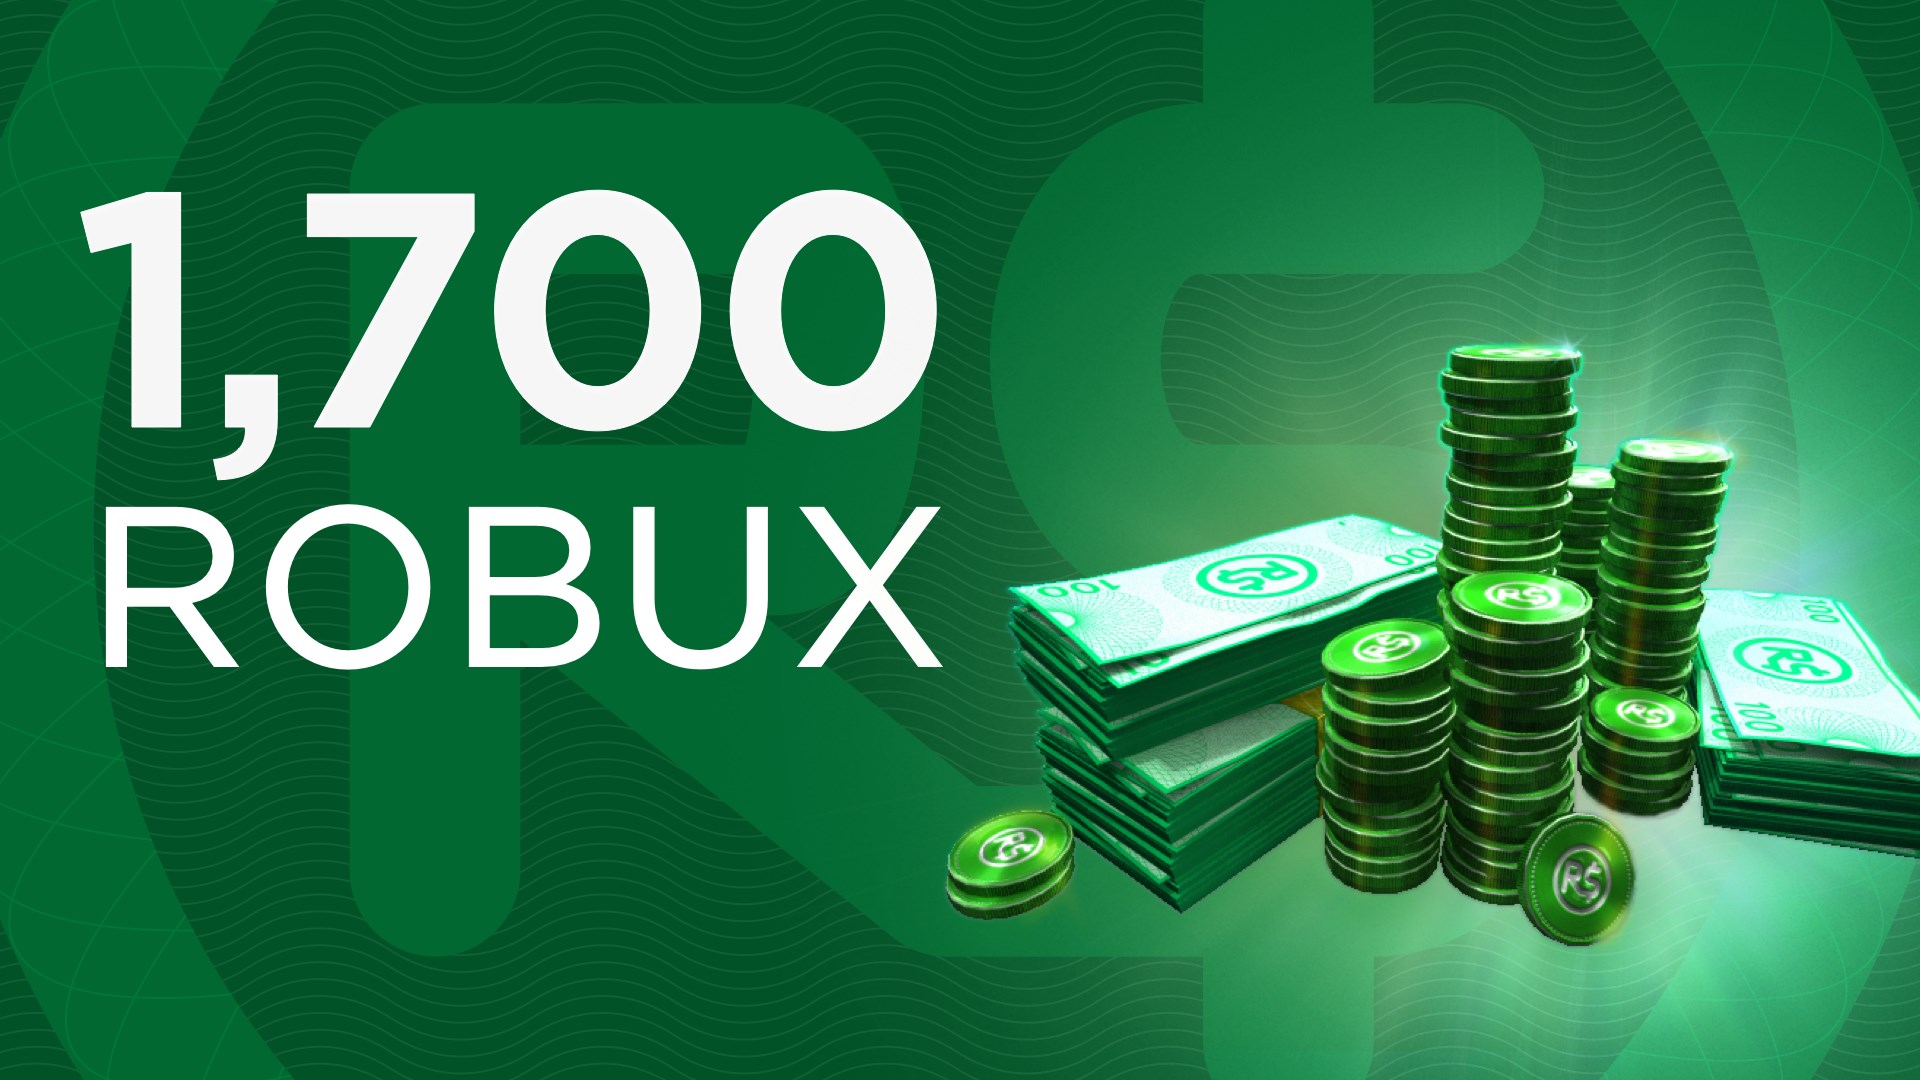 1,700 Robux for Xbox.